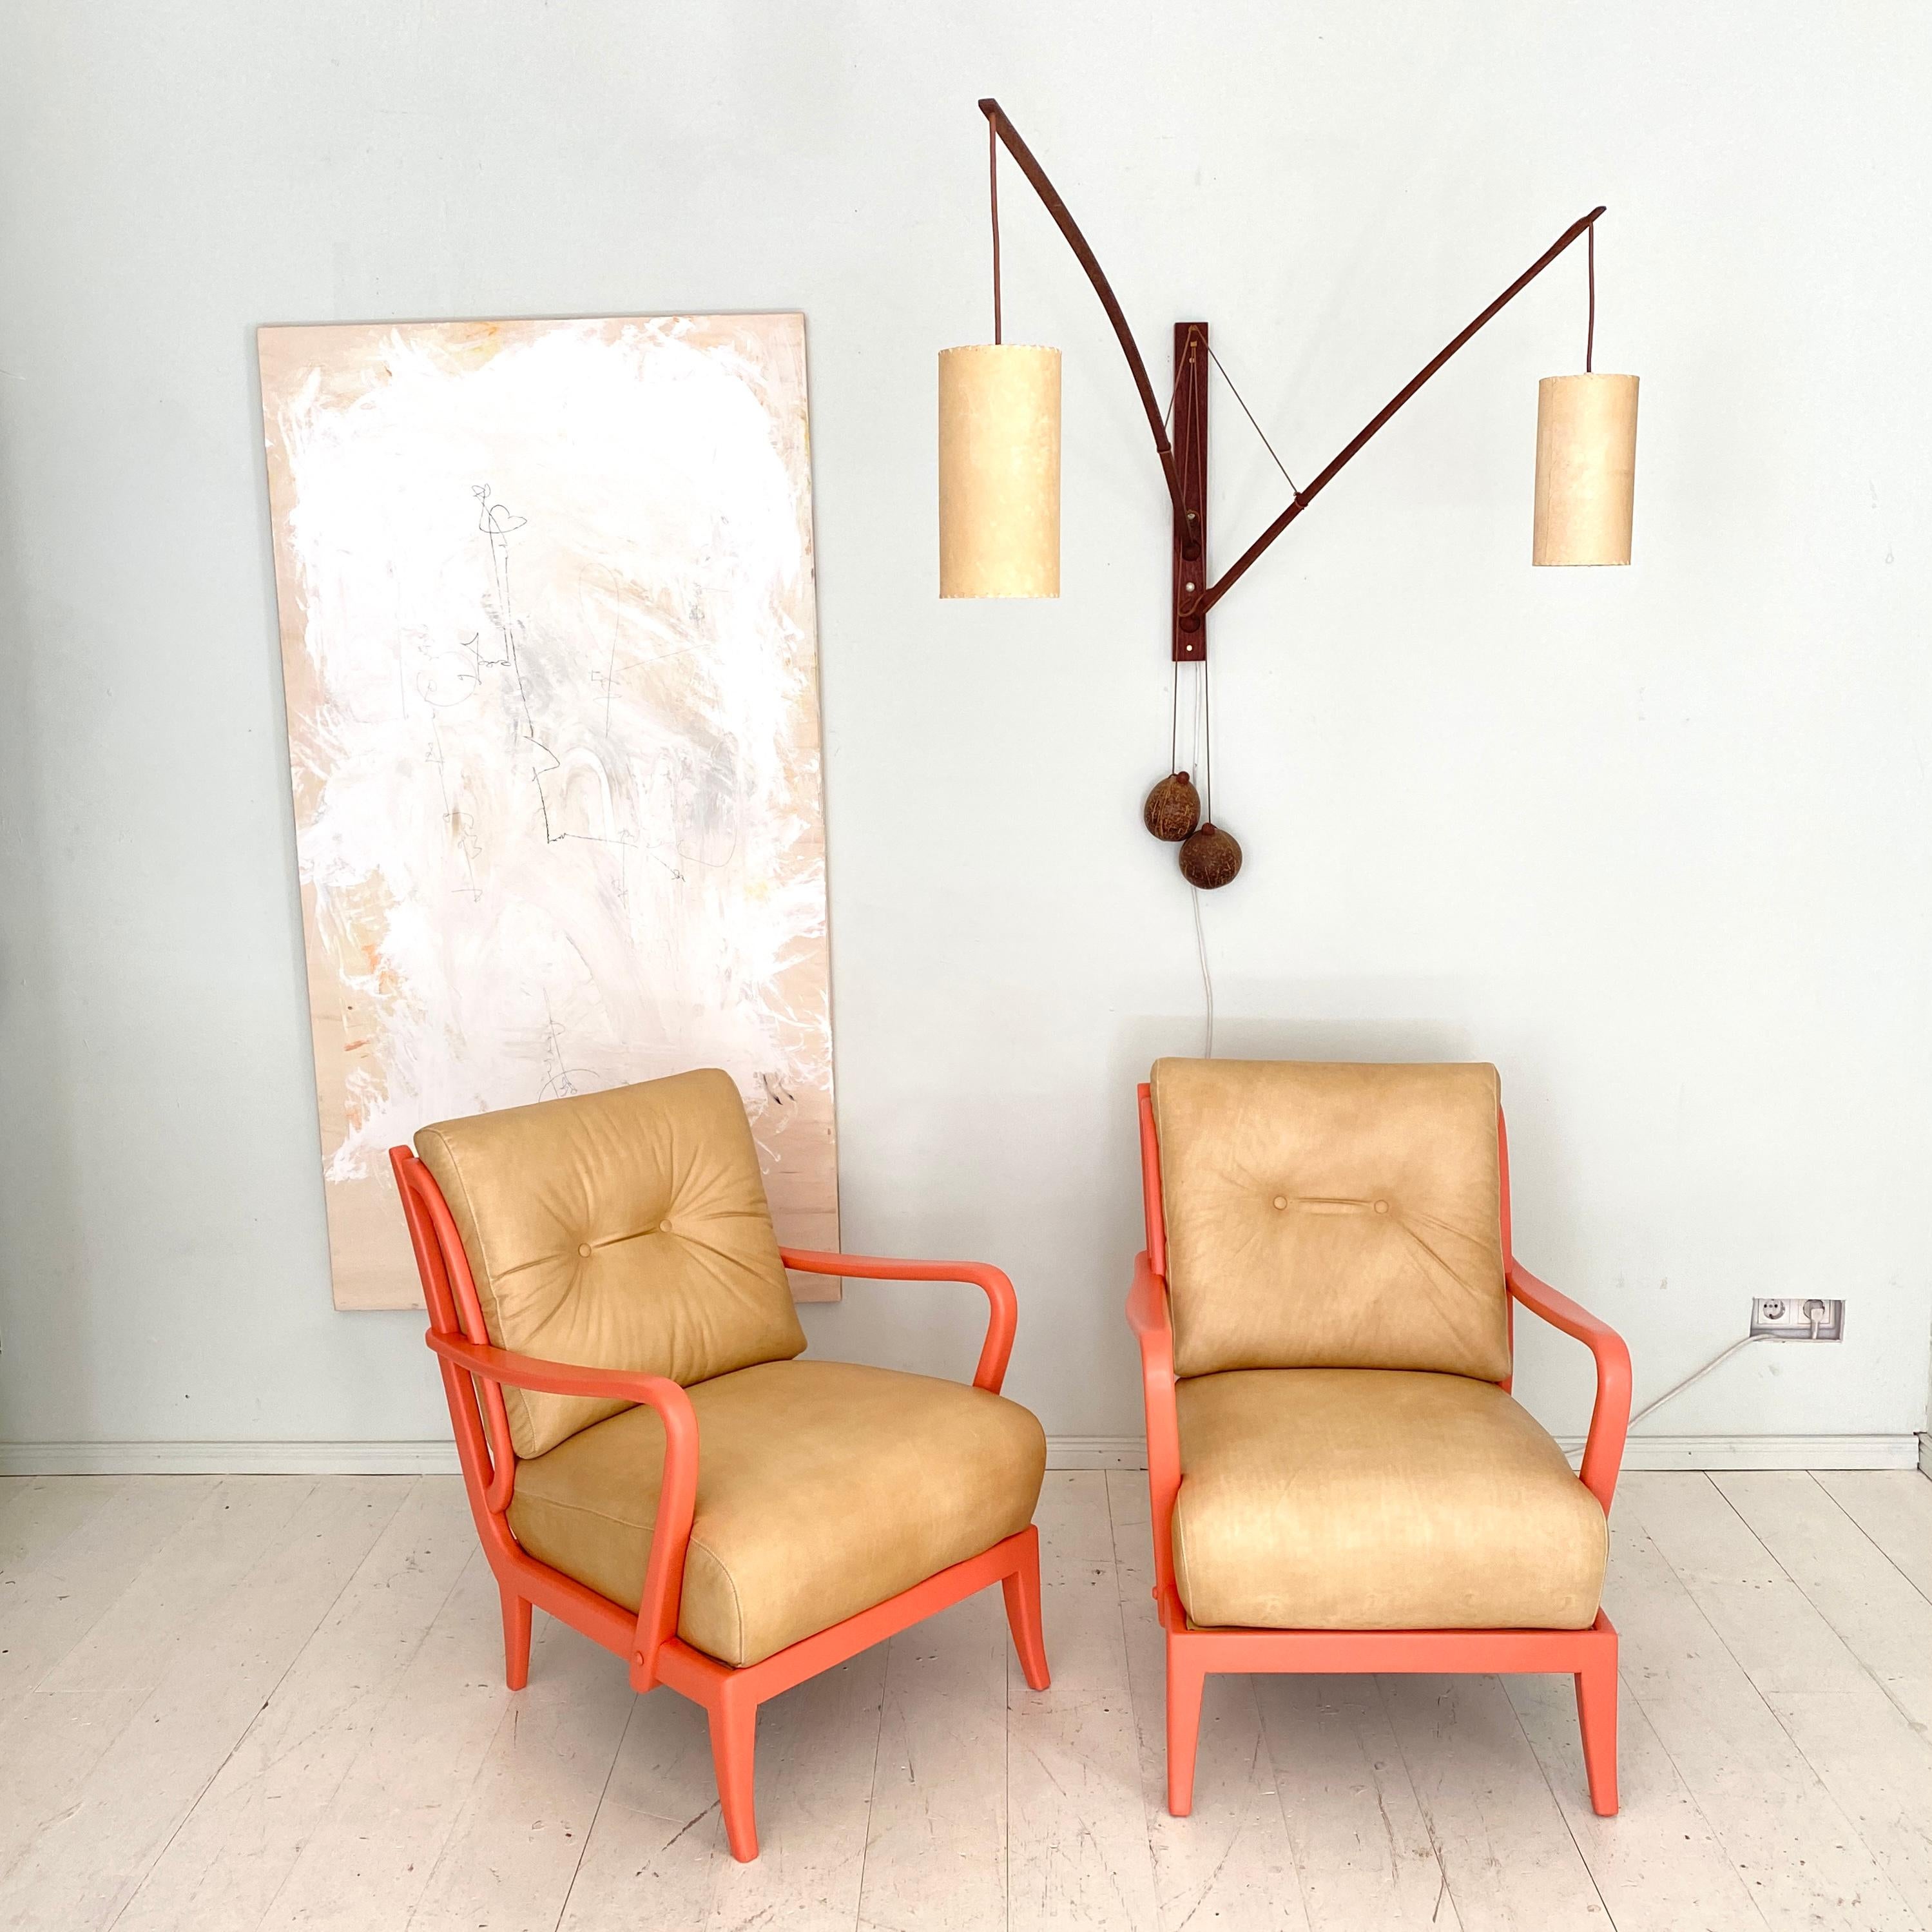 This beautiful pair of Italian mid century lounge chairs where made around 1950.
They are made from solid beech ans lacquered in a coral color and have been reupholstered in a beige vintage leather.
A unique piece which is a great eye-catcher for